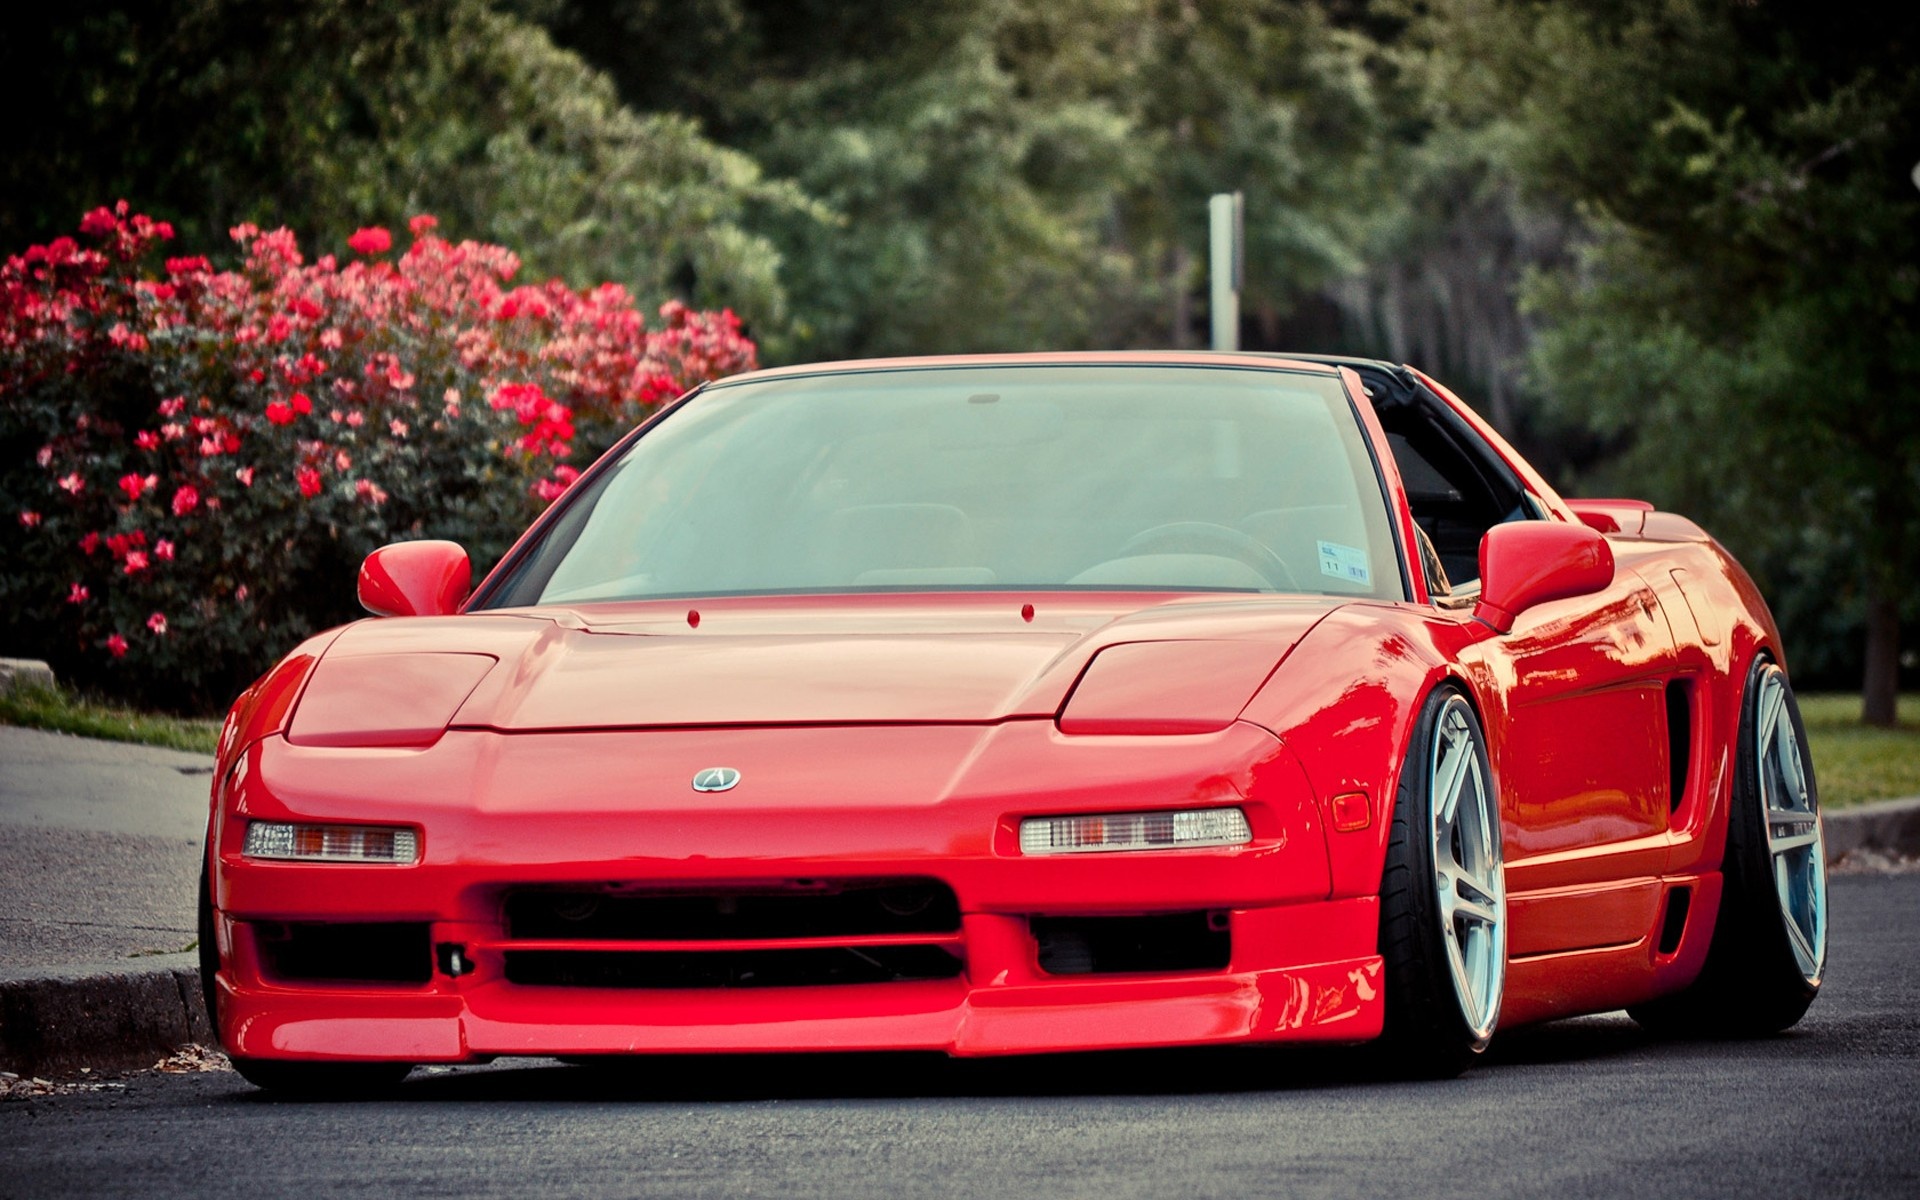 Acura NSX, Stunning HD wallpapers, Backgrounds of luxury, Unrivalled beauty, 1920x1200 HD Desktop